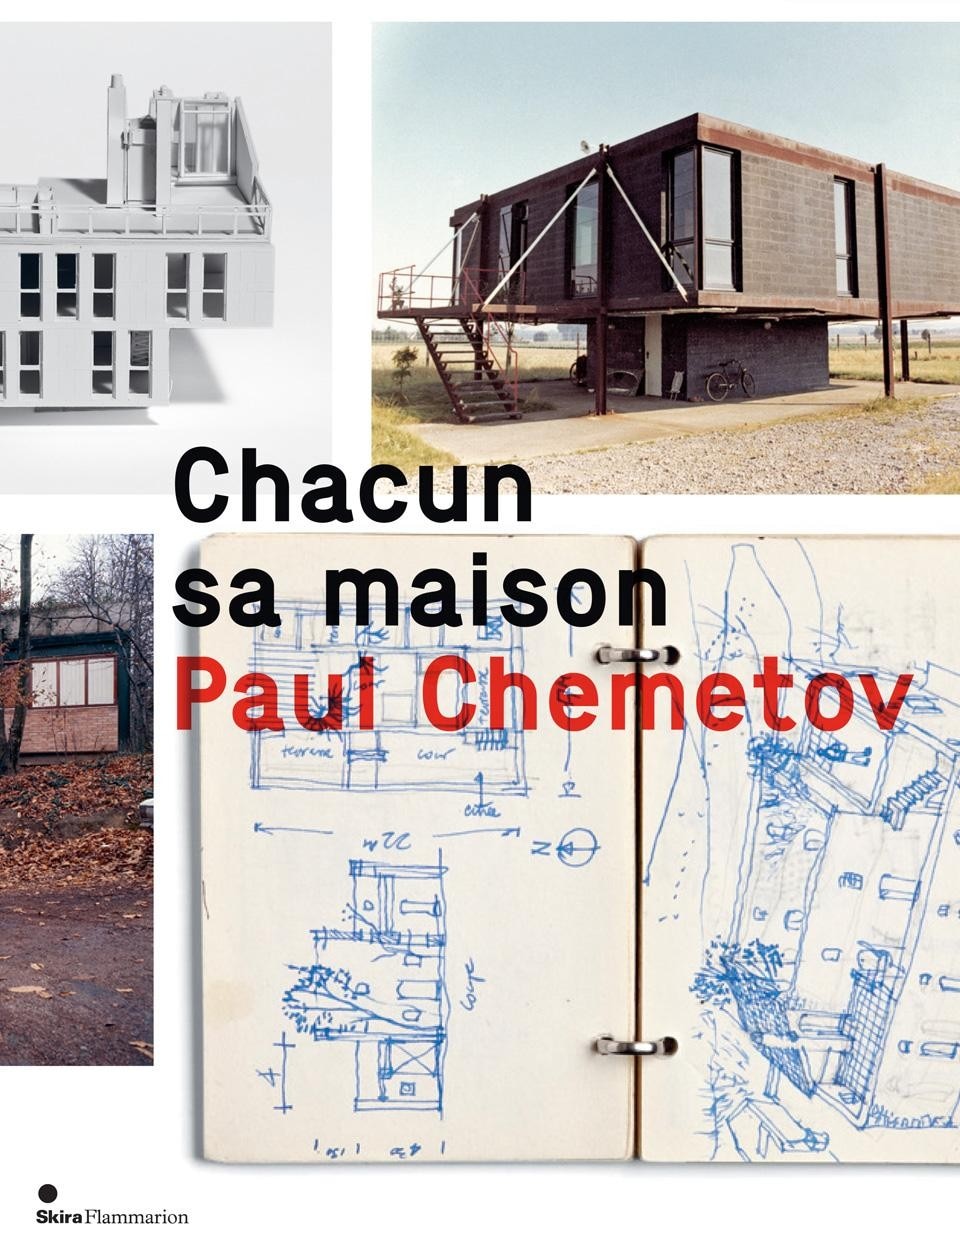 <i>Chacun sa maison. Paul Chemetov</i>, catalogue of the exhibition, published by Skira/Flammarion